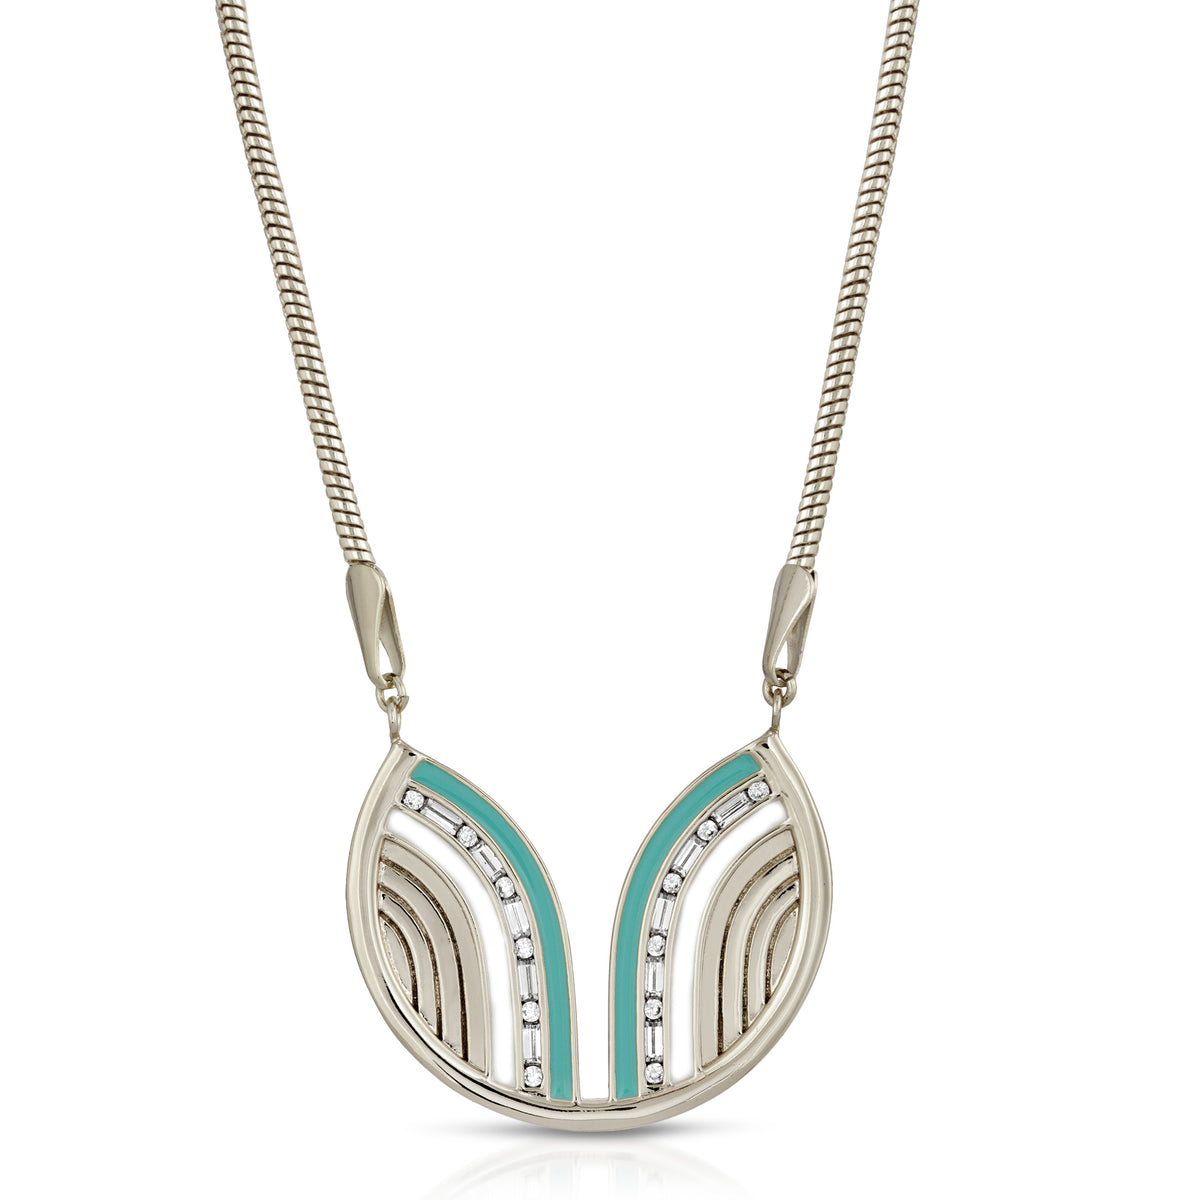 South Beach Necklace - Turquoise/White